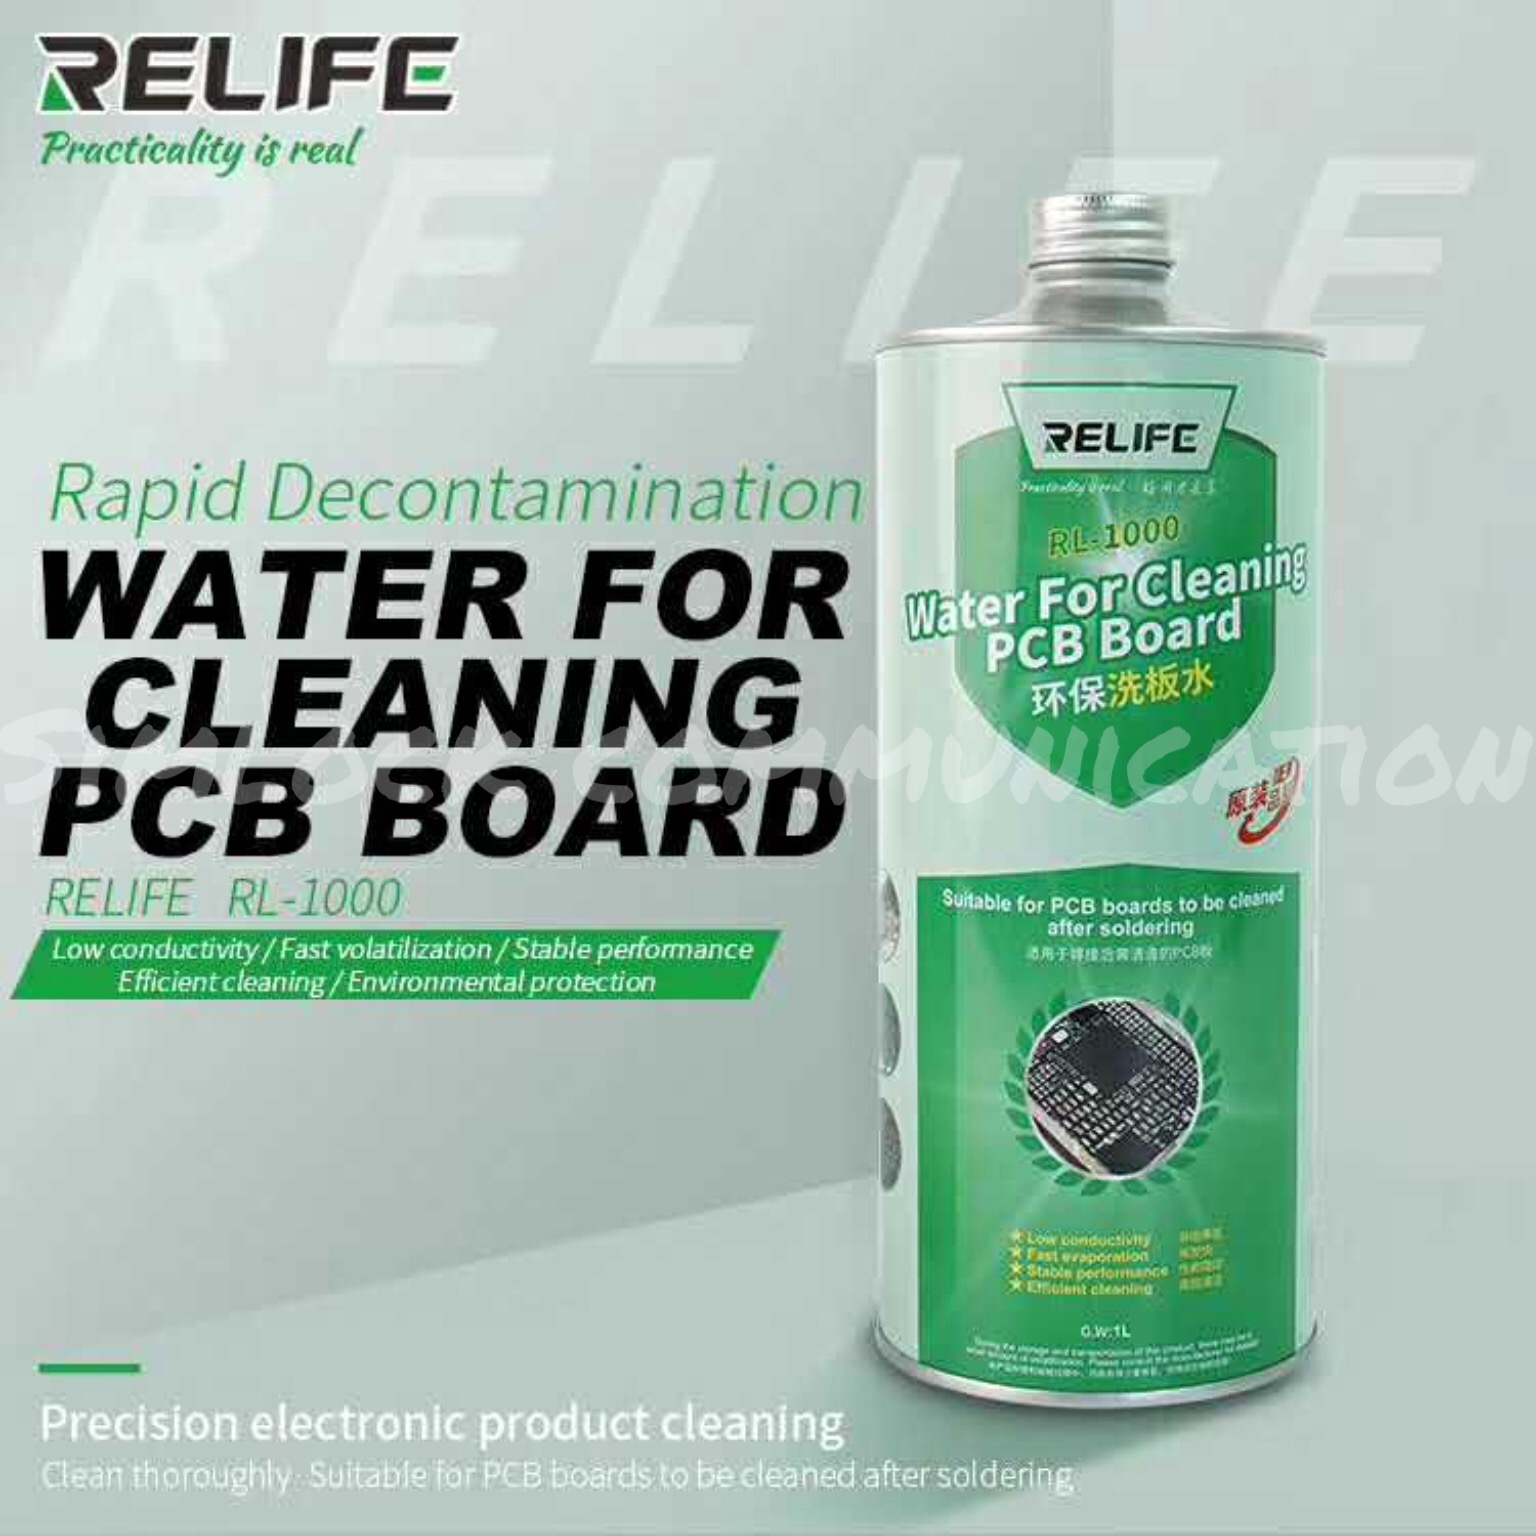 Wholesale relife rl-1000 water for cleaning pcb board